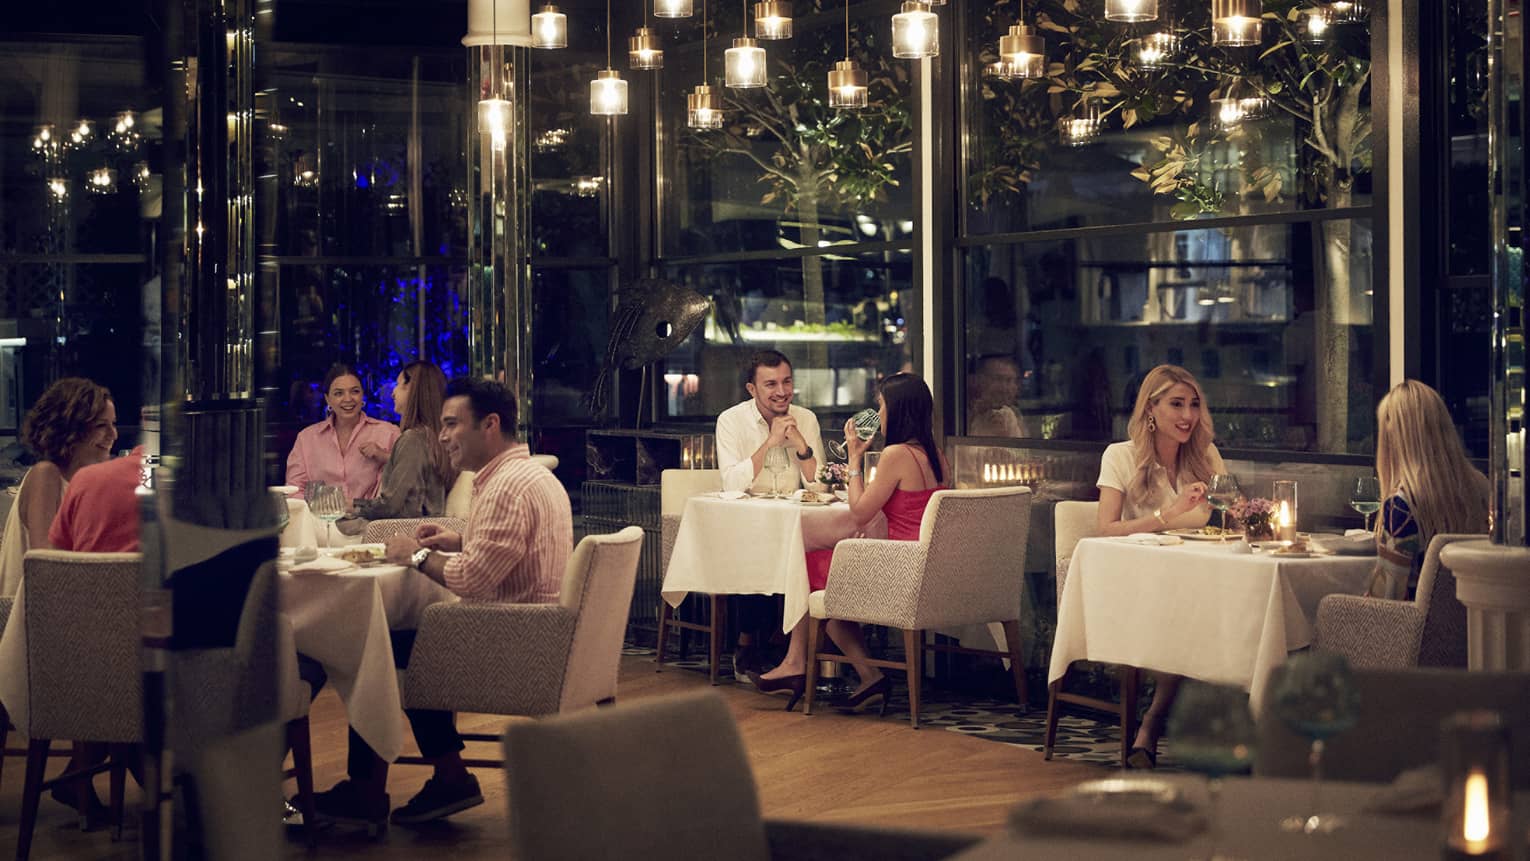 Patrons dining at AQUA under hanging low lighting in an intimate atmosphere